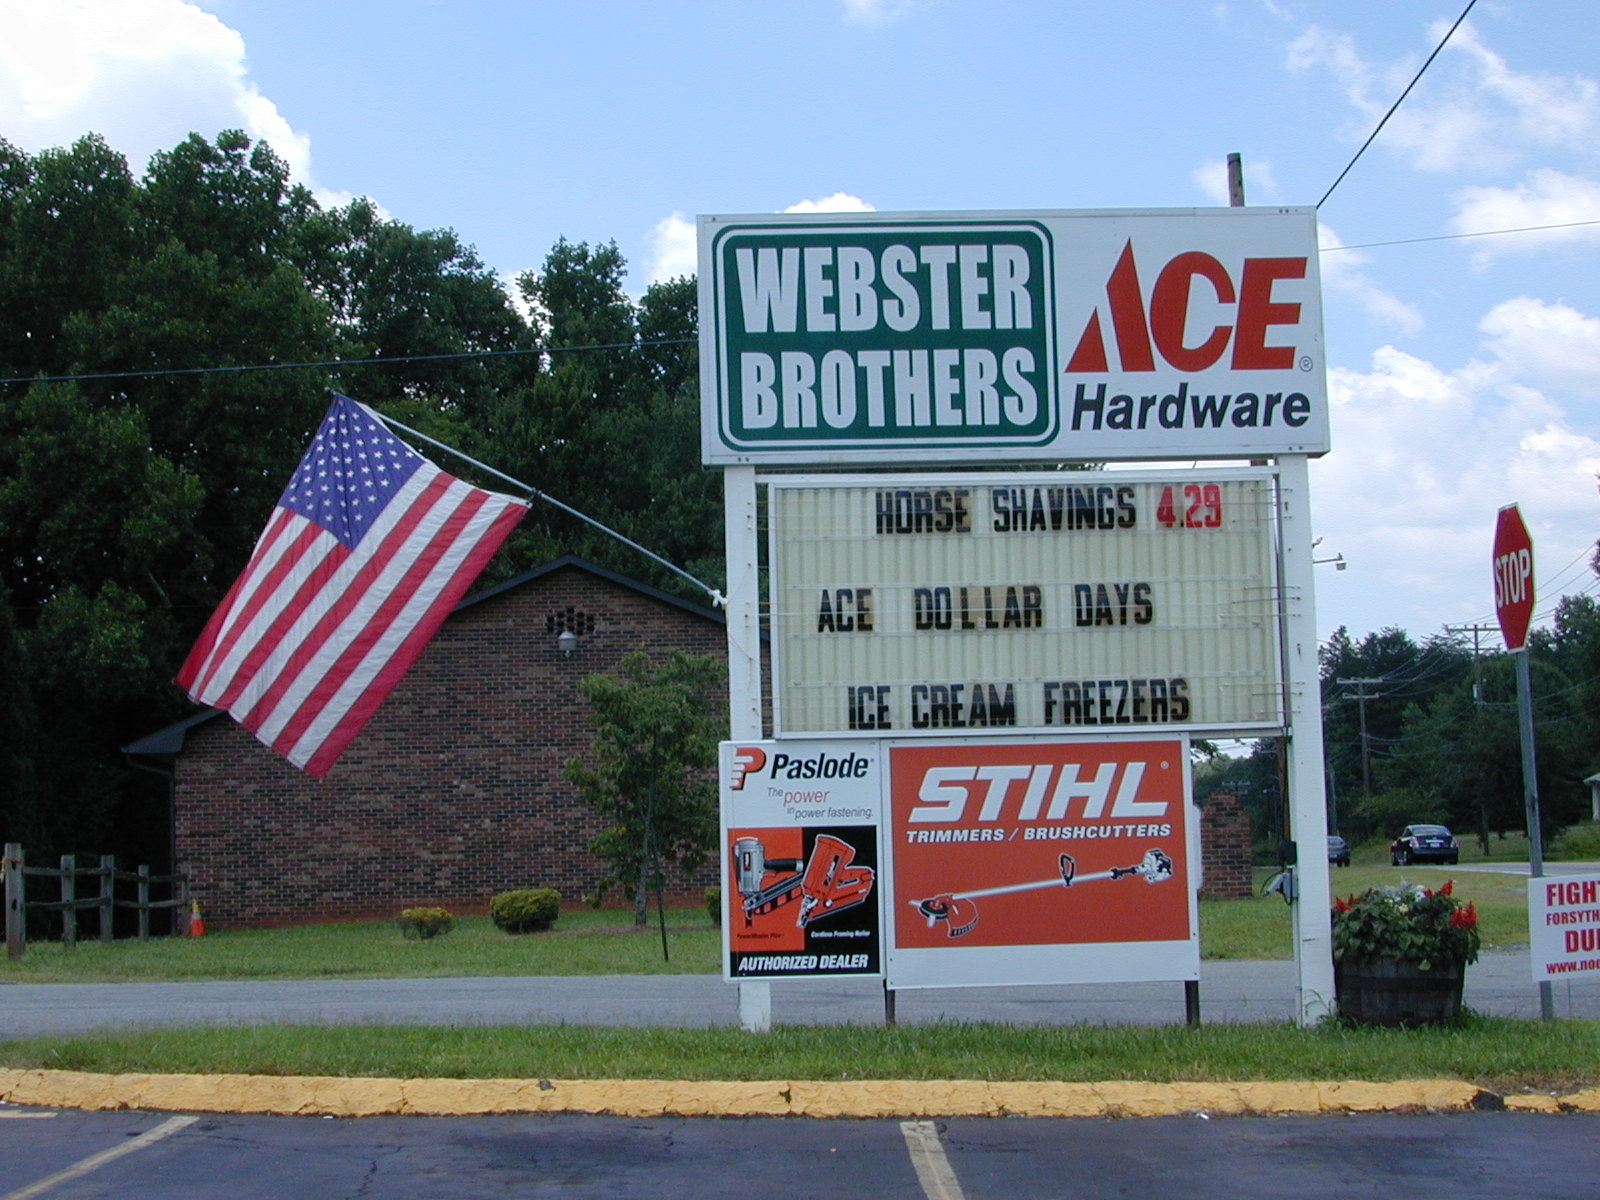 Picture of Sale at Webster Brothers